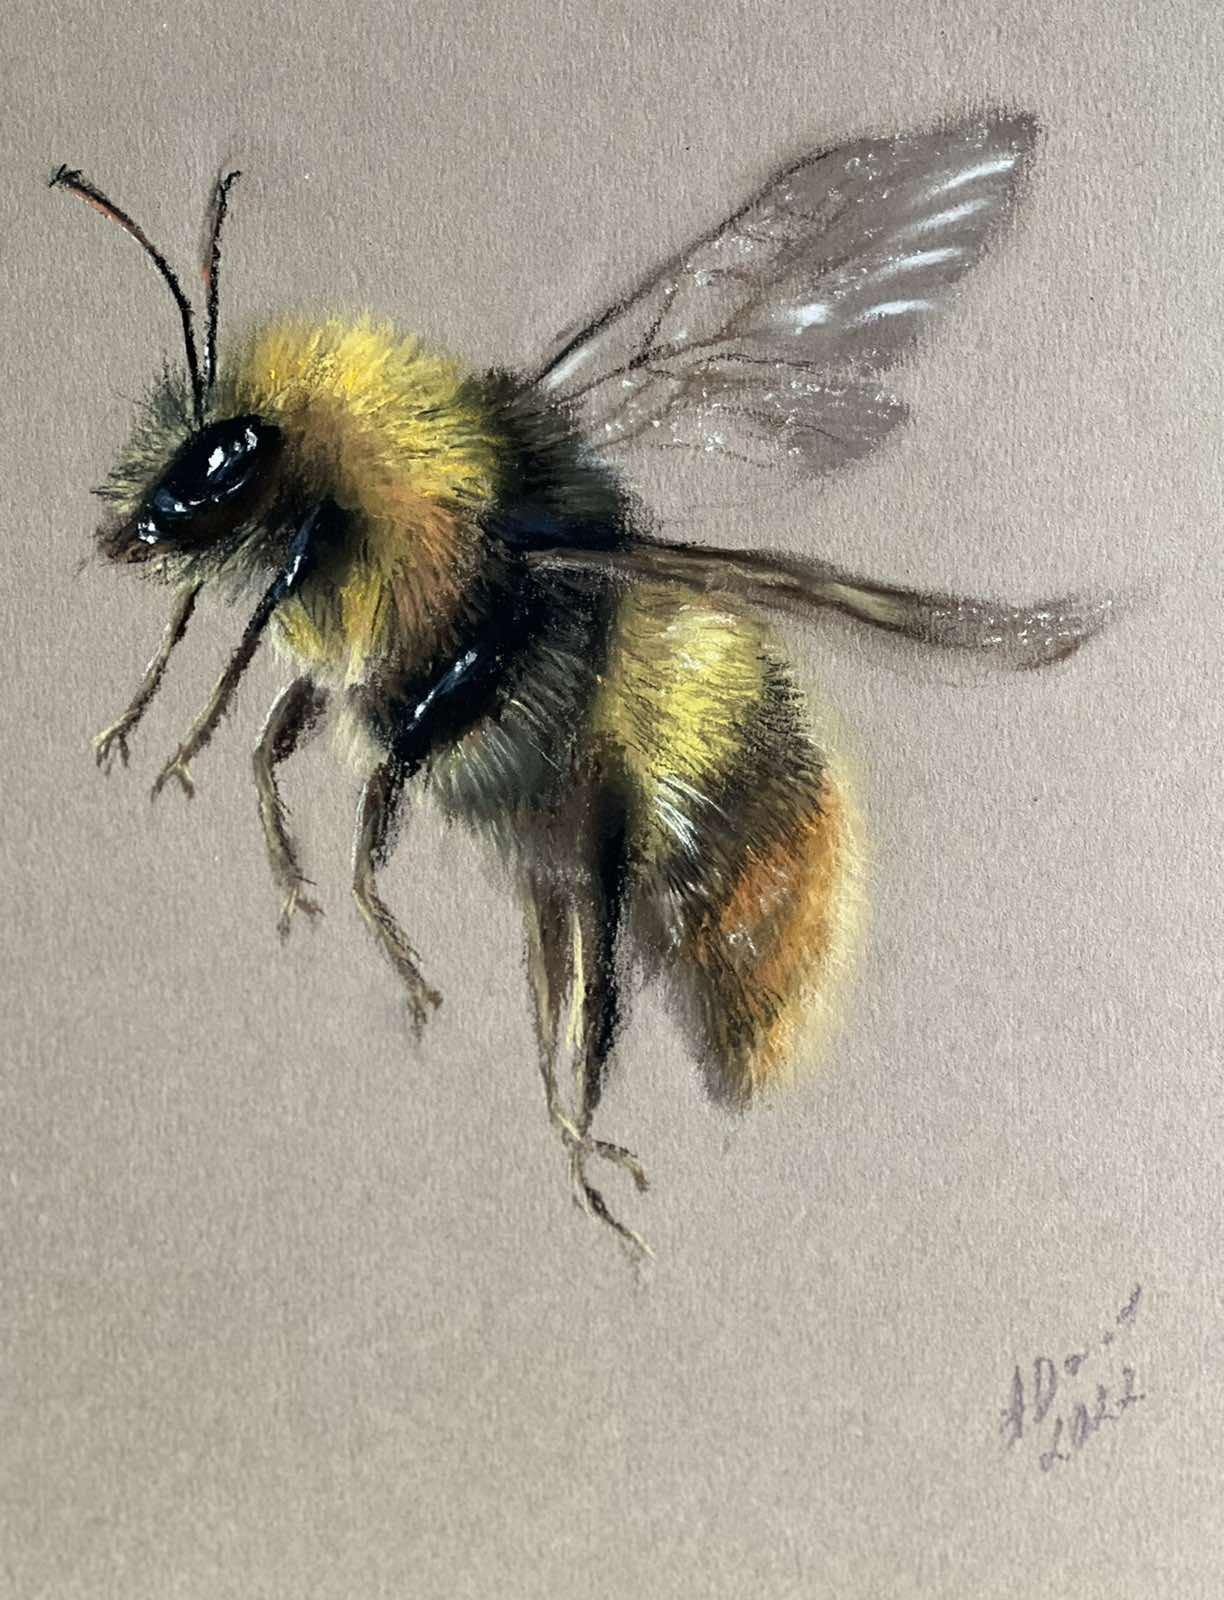 How to draw honey bee and flowers in graphite pencil - YouTube